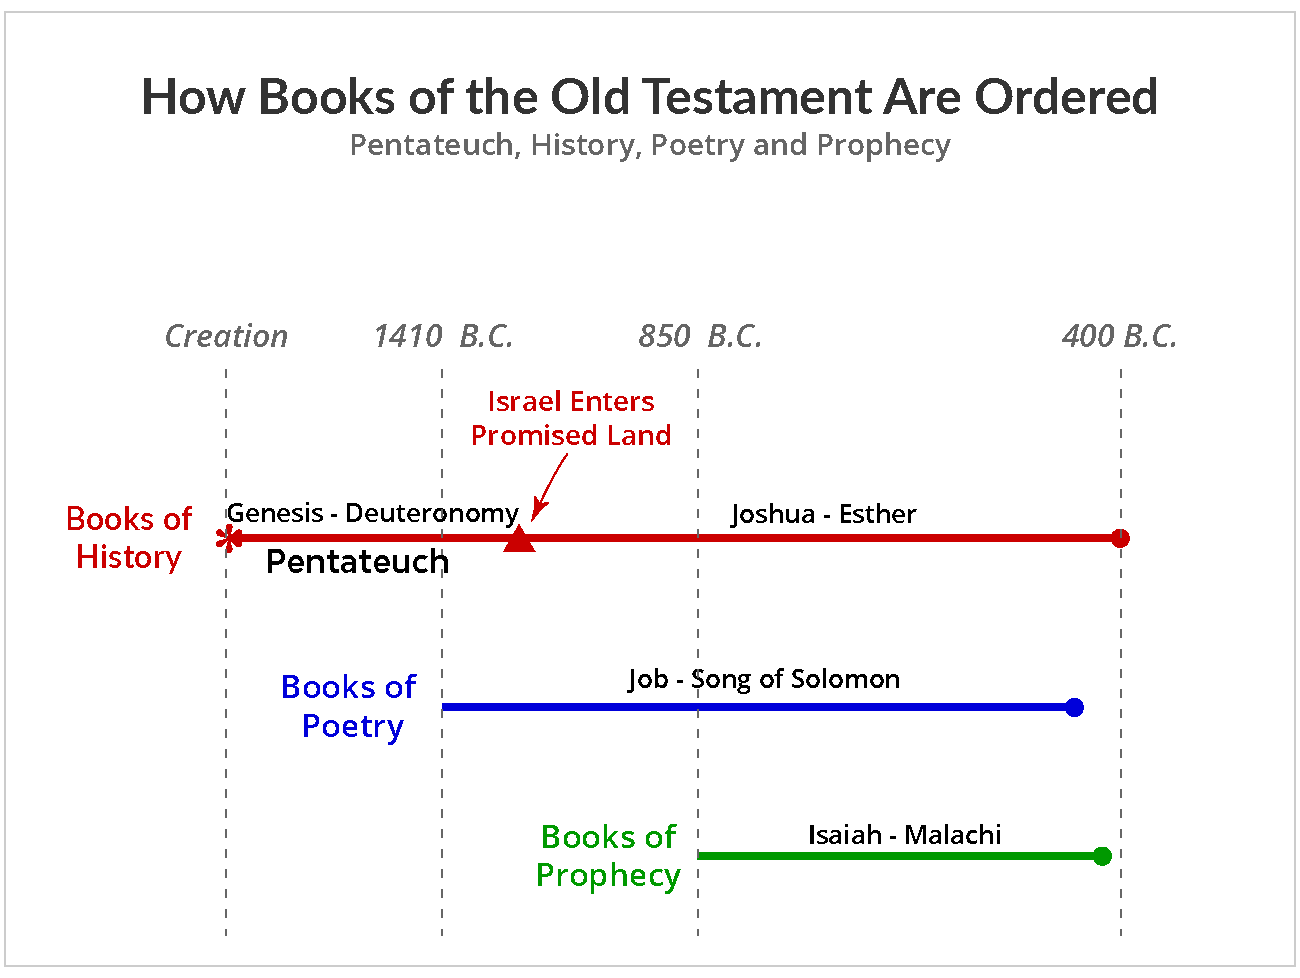 How Books of the Old Testament Are Ordered